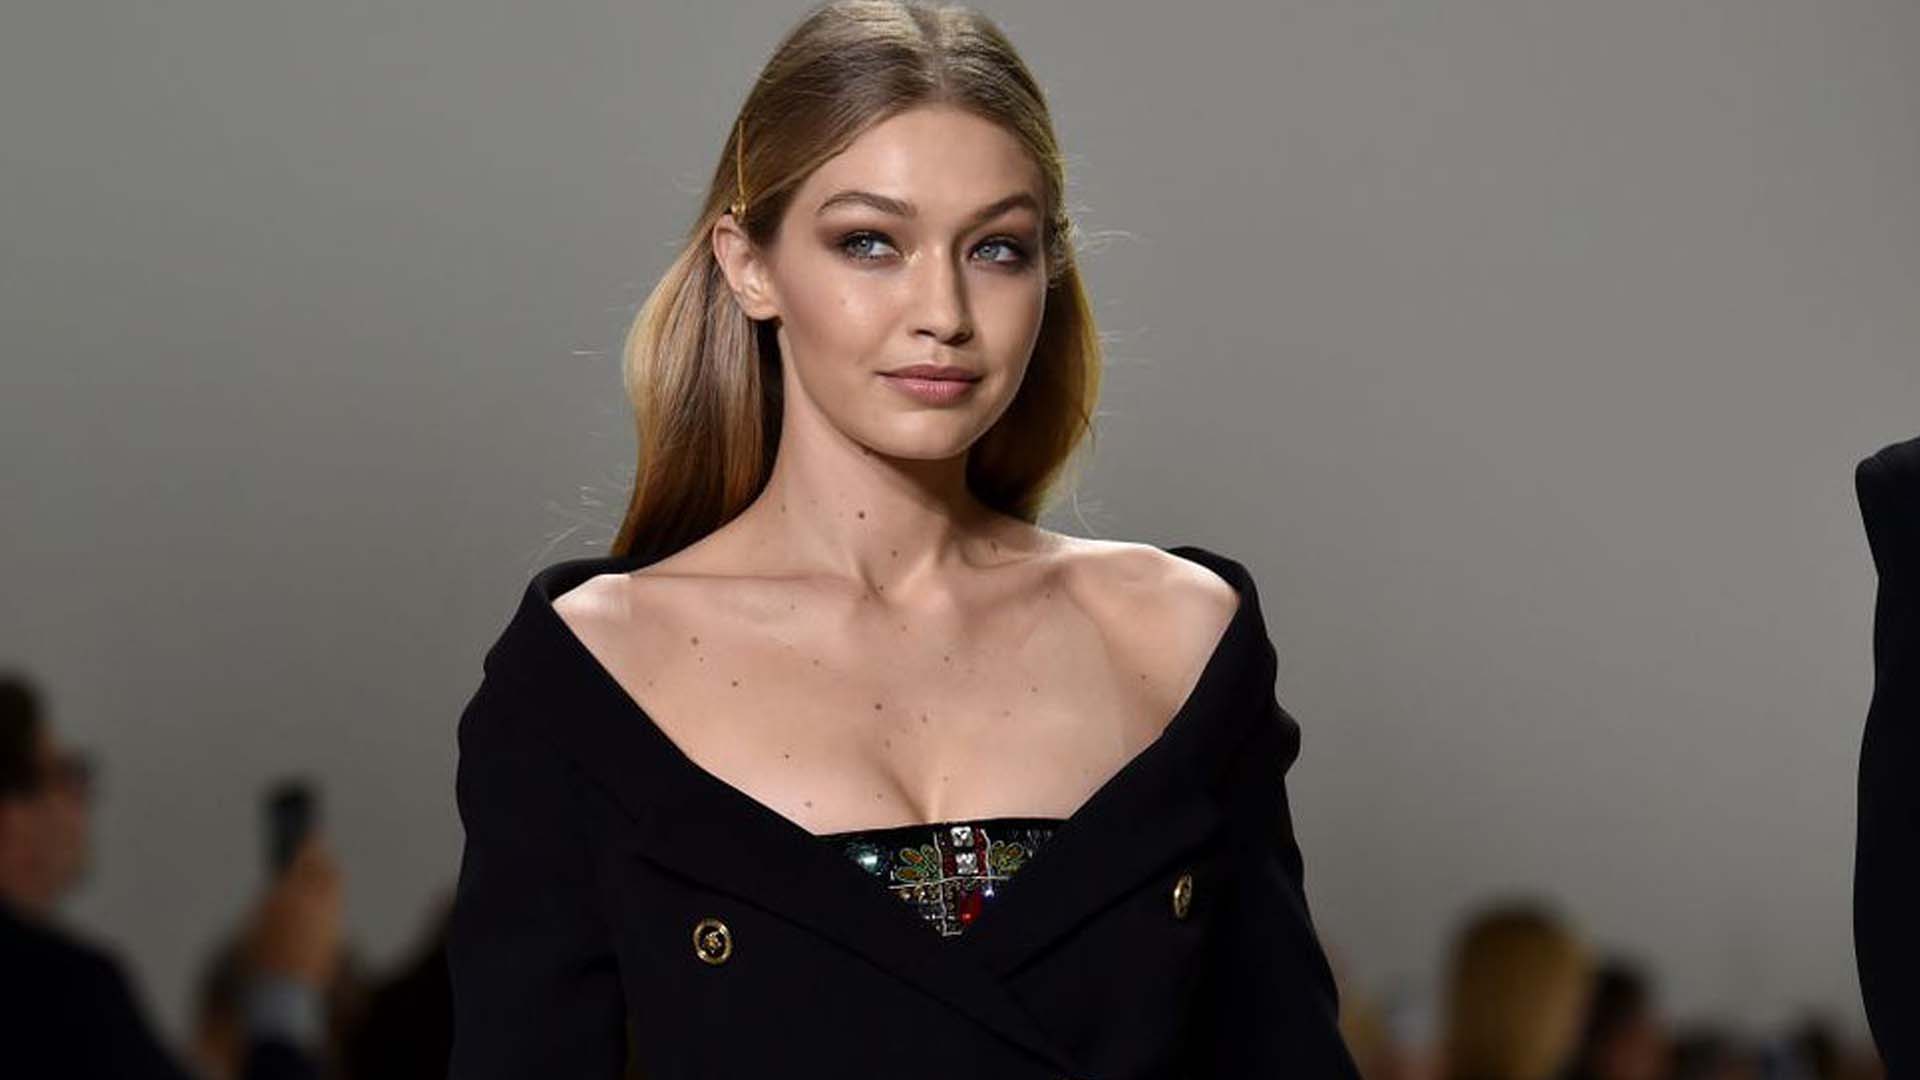 Gigi Hadid interview: she didn't have a runway body